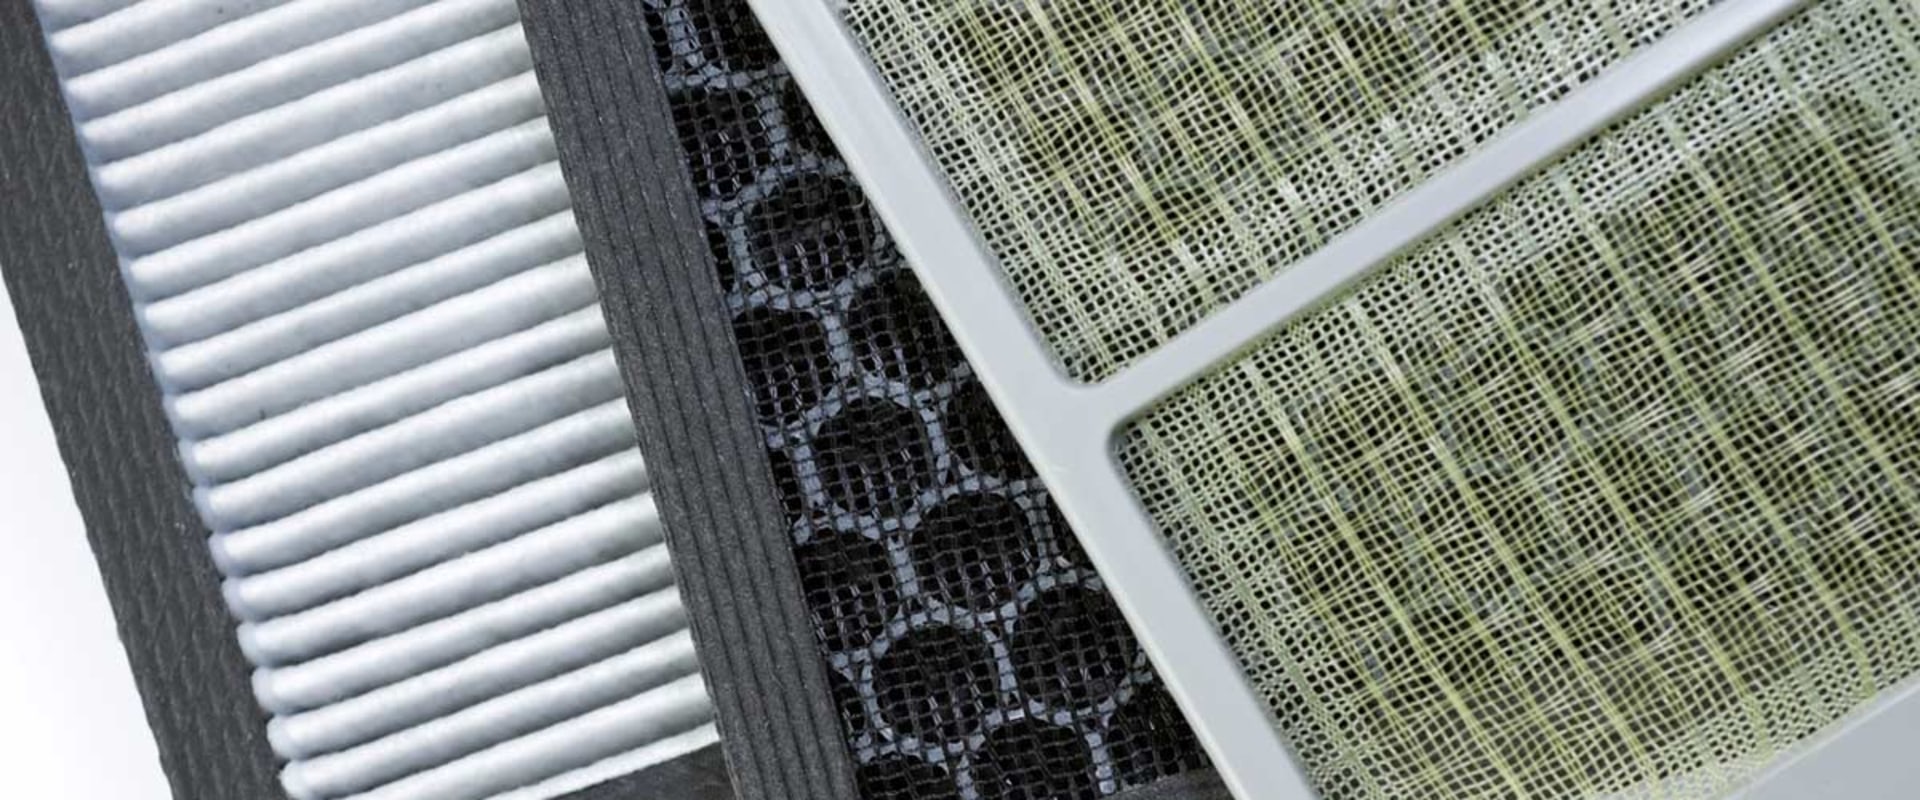 Electrostatic Air Cleaners vs Filters: Which is Better?